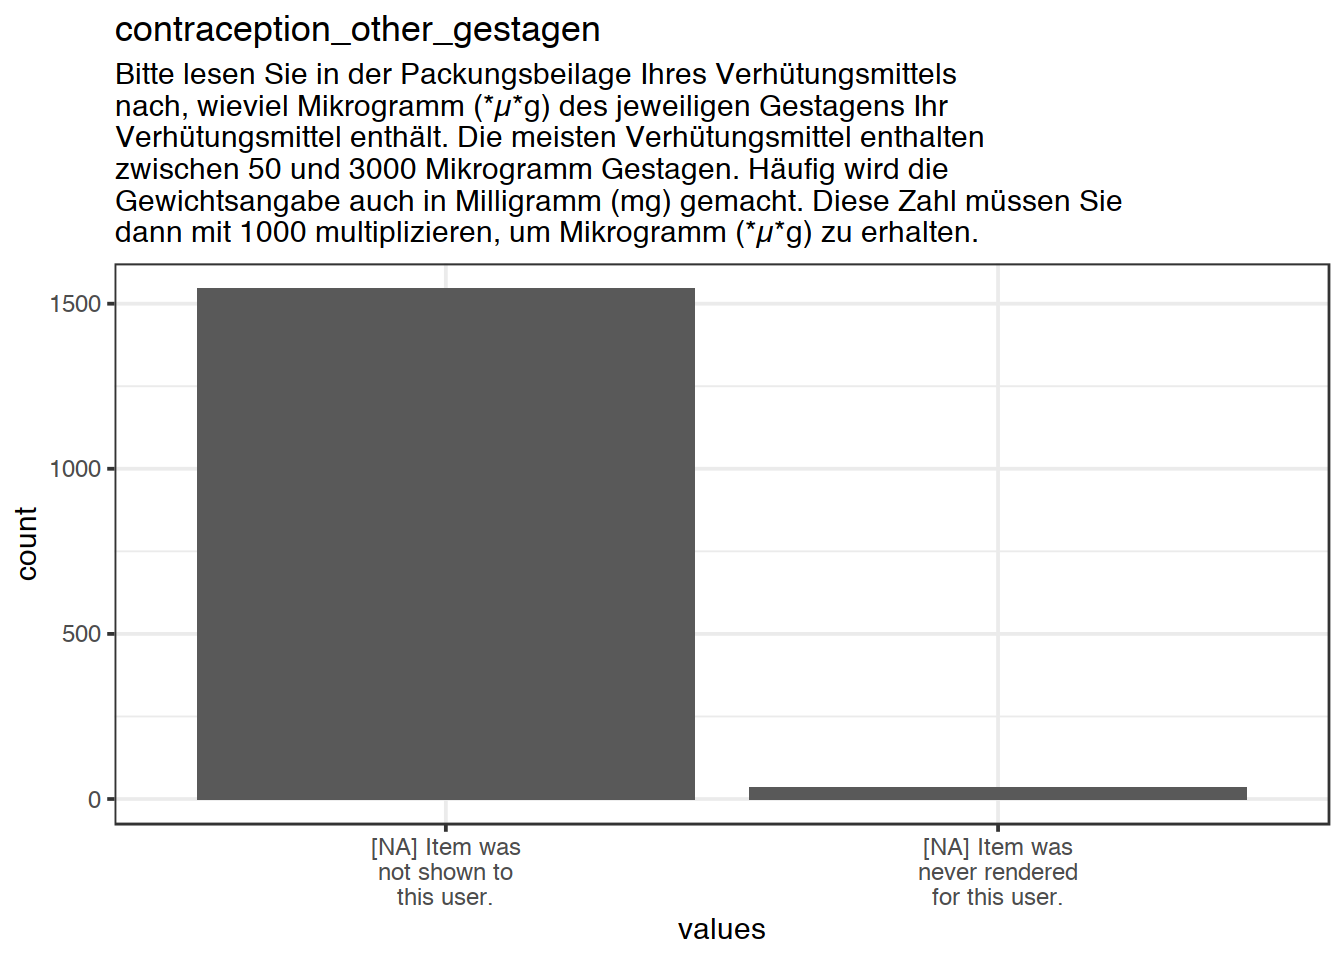 Plot of missing values for contraception_other_gestagen